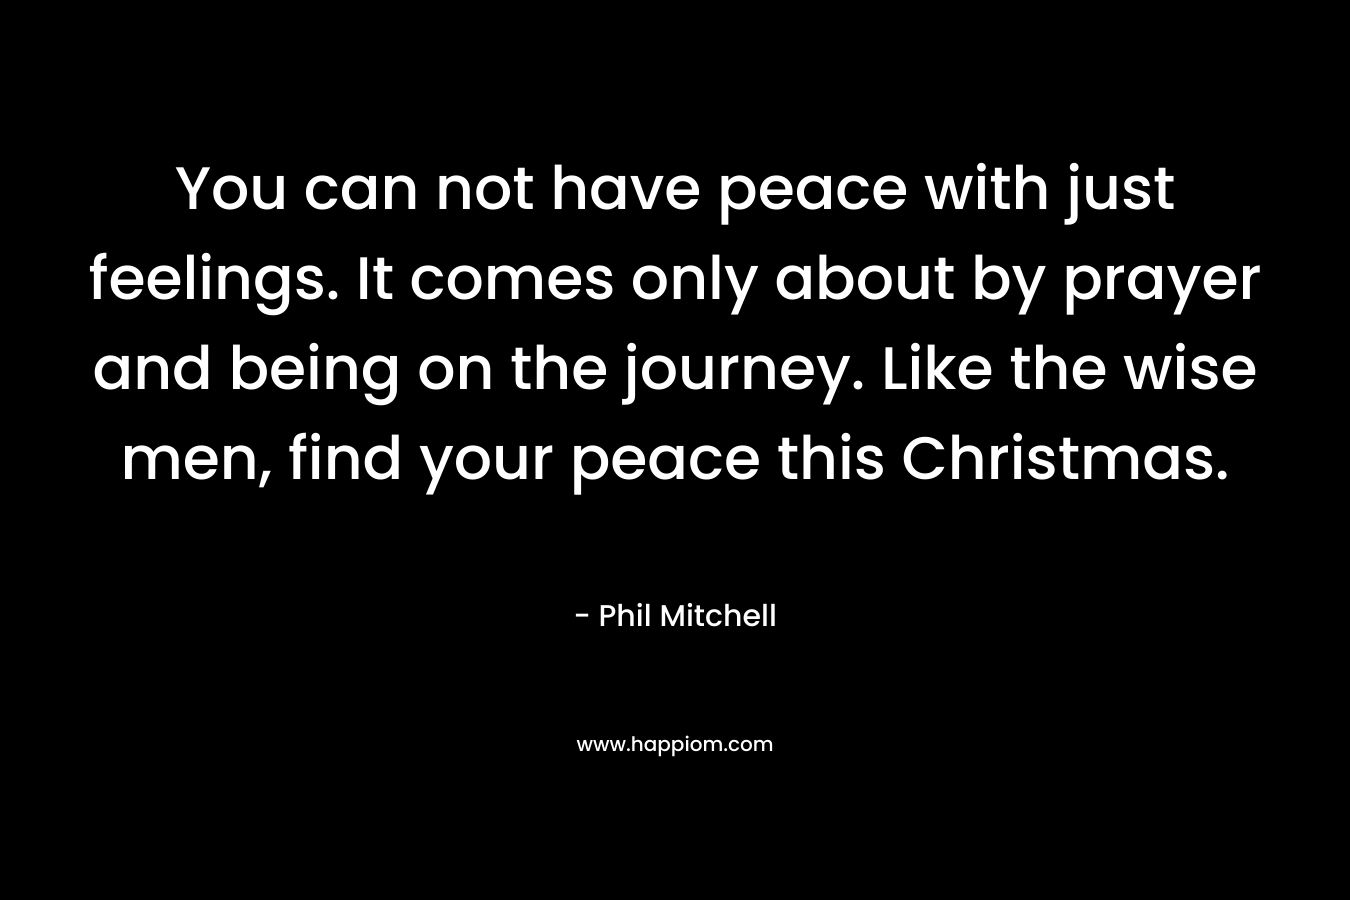 You can not have peace with just feelings. It comes only about by prayer and being on the journey. Like the wise men, find your peace this Christmas.